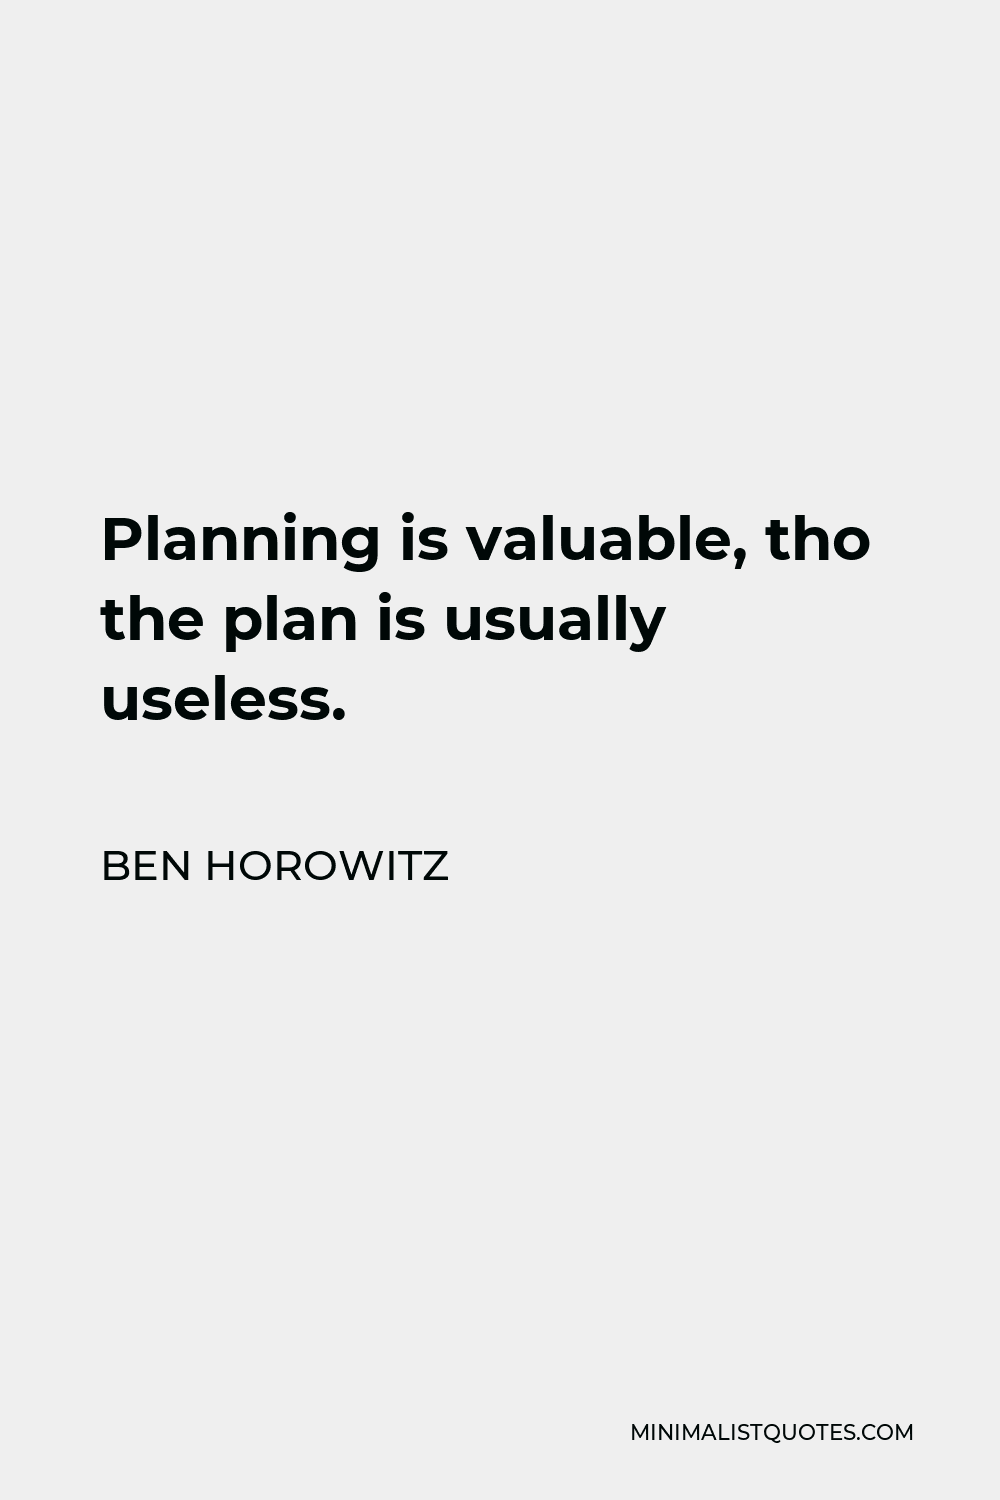 Ben Horowitz Quote - Planning is valuable, tho the plan is usually useless.